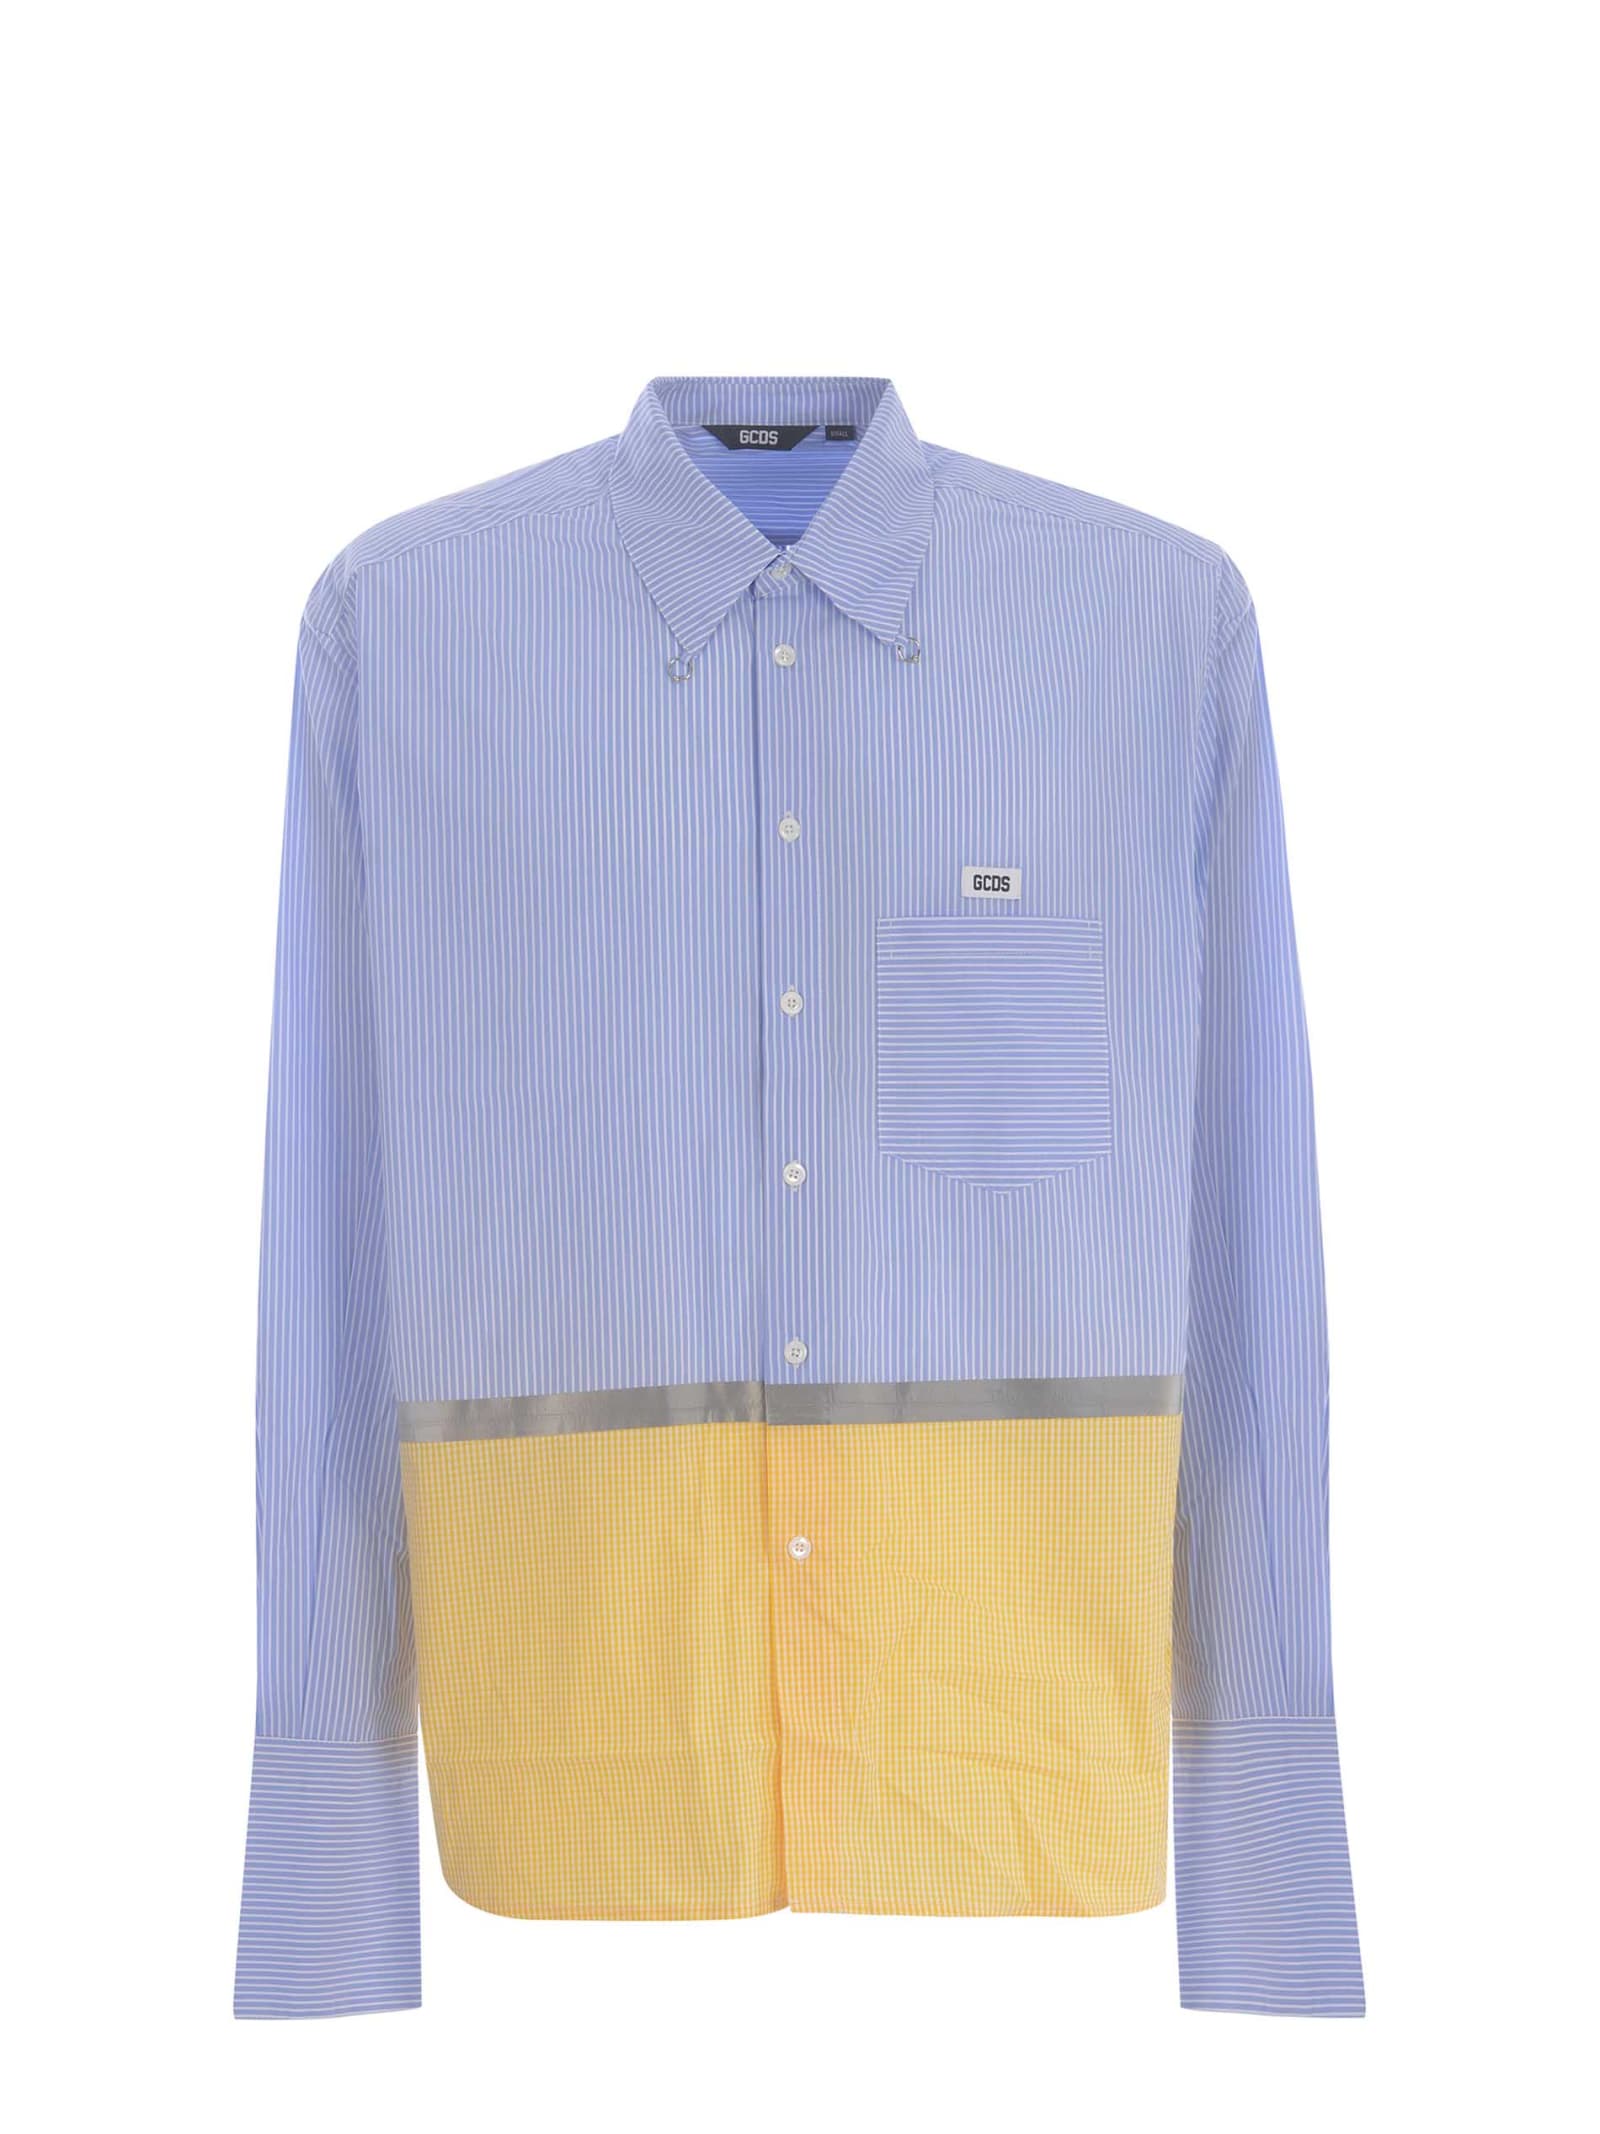 Shop Gcds Shirt  Sriped Tape Made Of Cotton In Light Blue